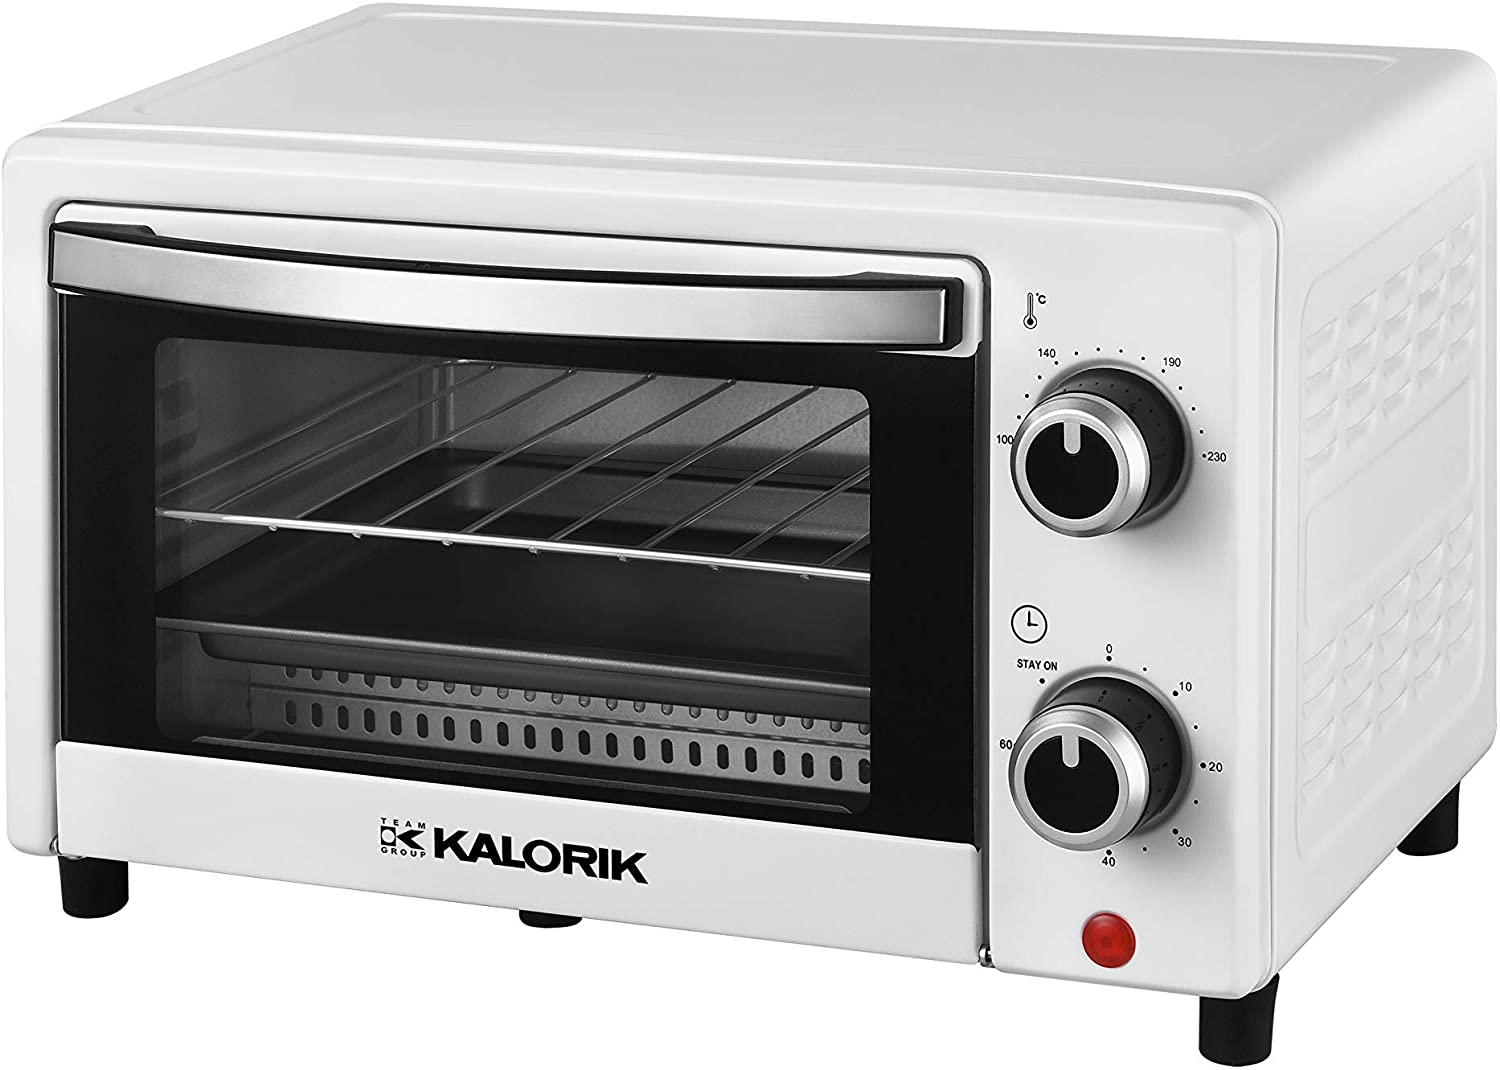 Team Kalorik TKG OT 2025 WH 9 Litre Mini Oven with Baking Tray, Grill Grate and Crumb Drawer (0-230°C), 900, 9 Litres, White